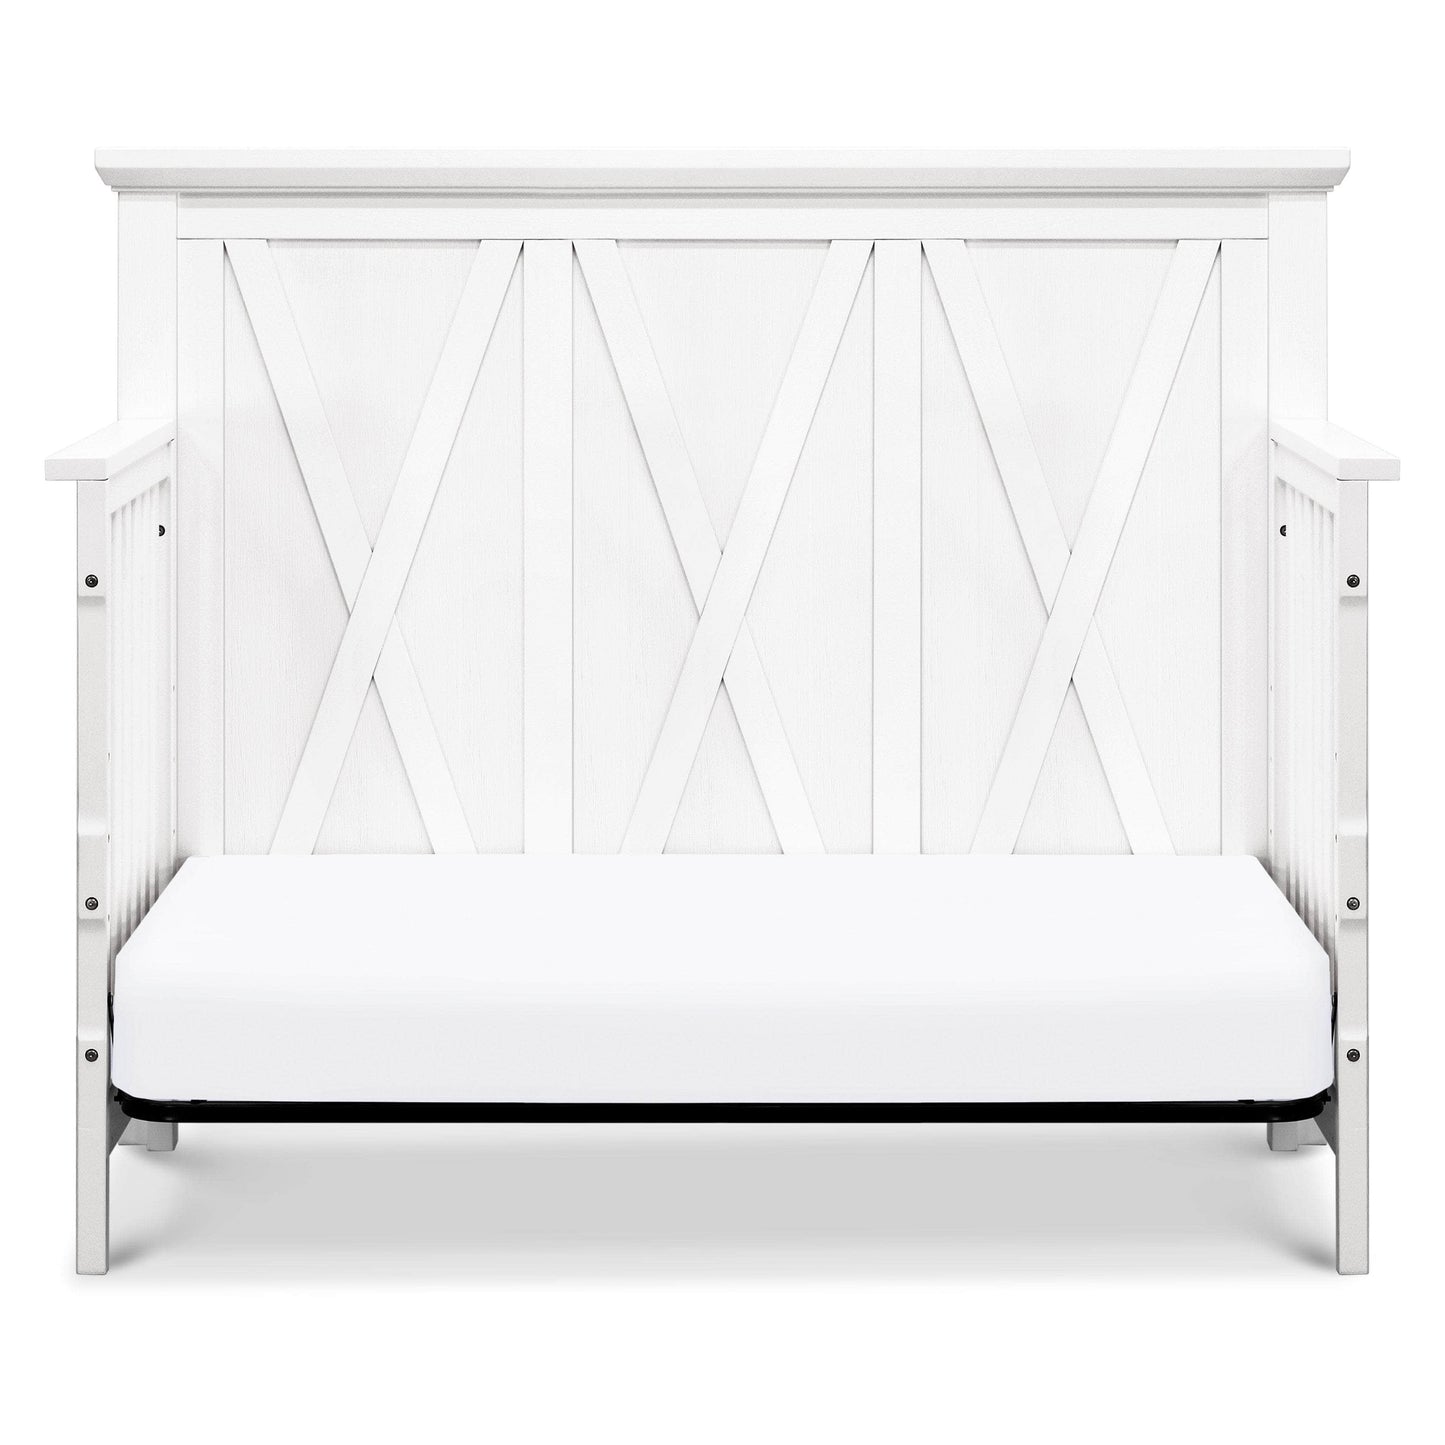 B14501LW,Emory Farmhouse 4-in-1 Convertible Crib in Linen White